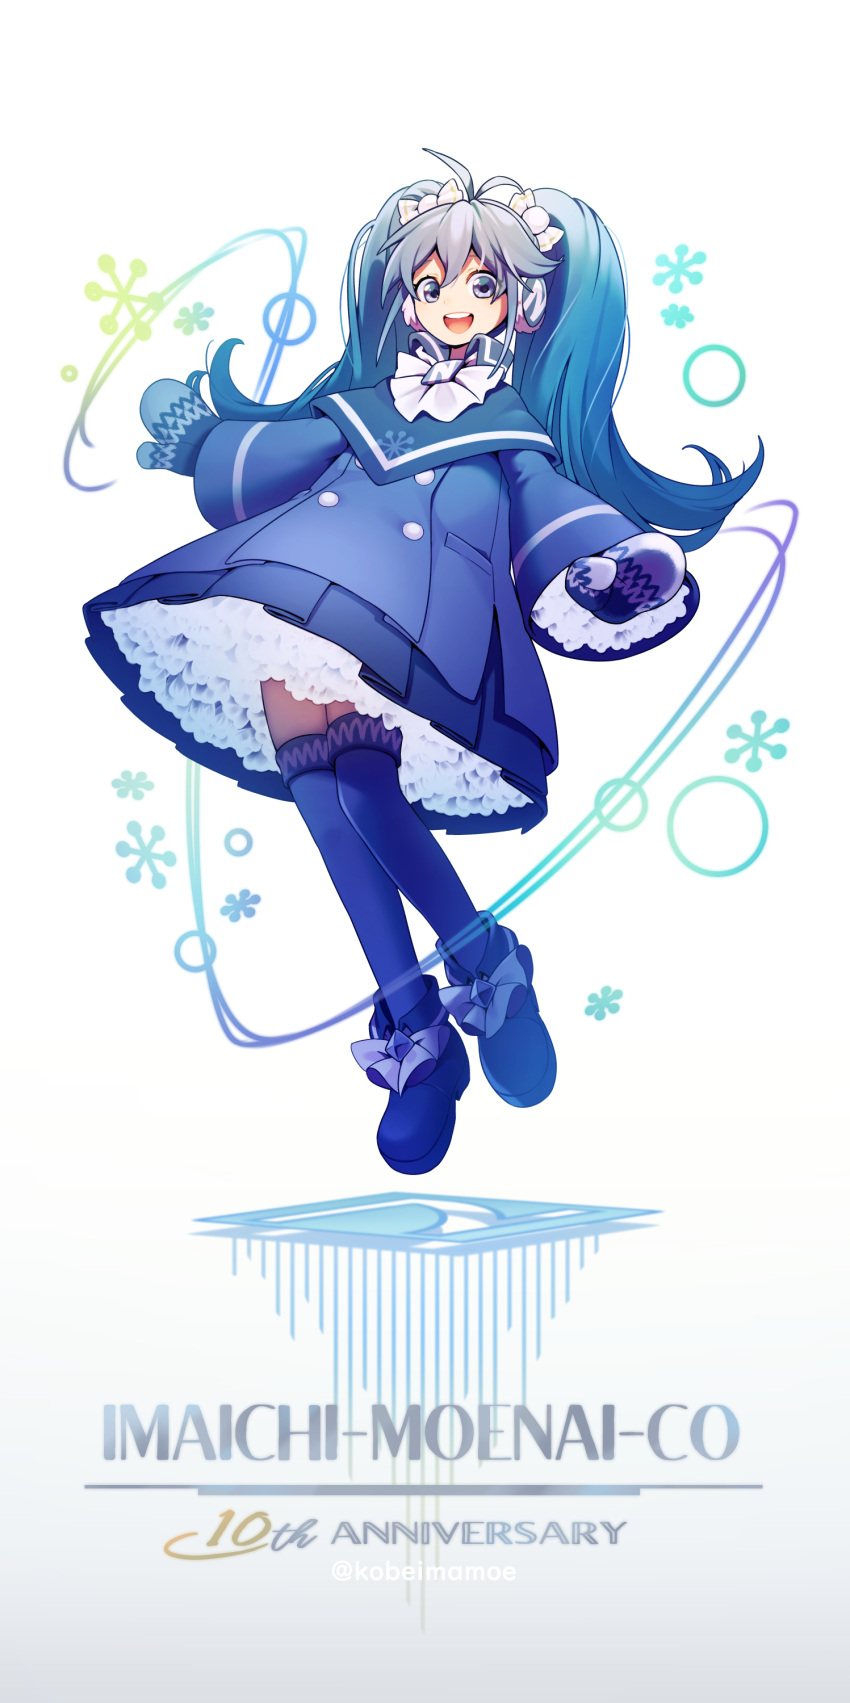 1girl :d abiko_yuuji absurdres ankle_boots anniversary antenna_hair bangs blue_coat blue_eyes blue_footwear blue_hair blue_legwear blue_mittens boots buttons candy_hair_ornament character_name coat double-breasted earmuffs eyebrows_visible_through_hair eyes_visible_through_hair food-themed_hair_ornament full_body gradient gradient_background hair_between_eyes hair_ornament highres imaichi_moenai_ko kobe_shinbun long_hair long_sleeves looking_at_viewer mittens open_mouth petticoat round_teeth smile solo teeth thighhighs twintails zettai_ryouiki